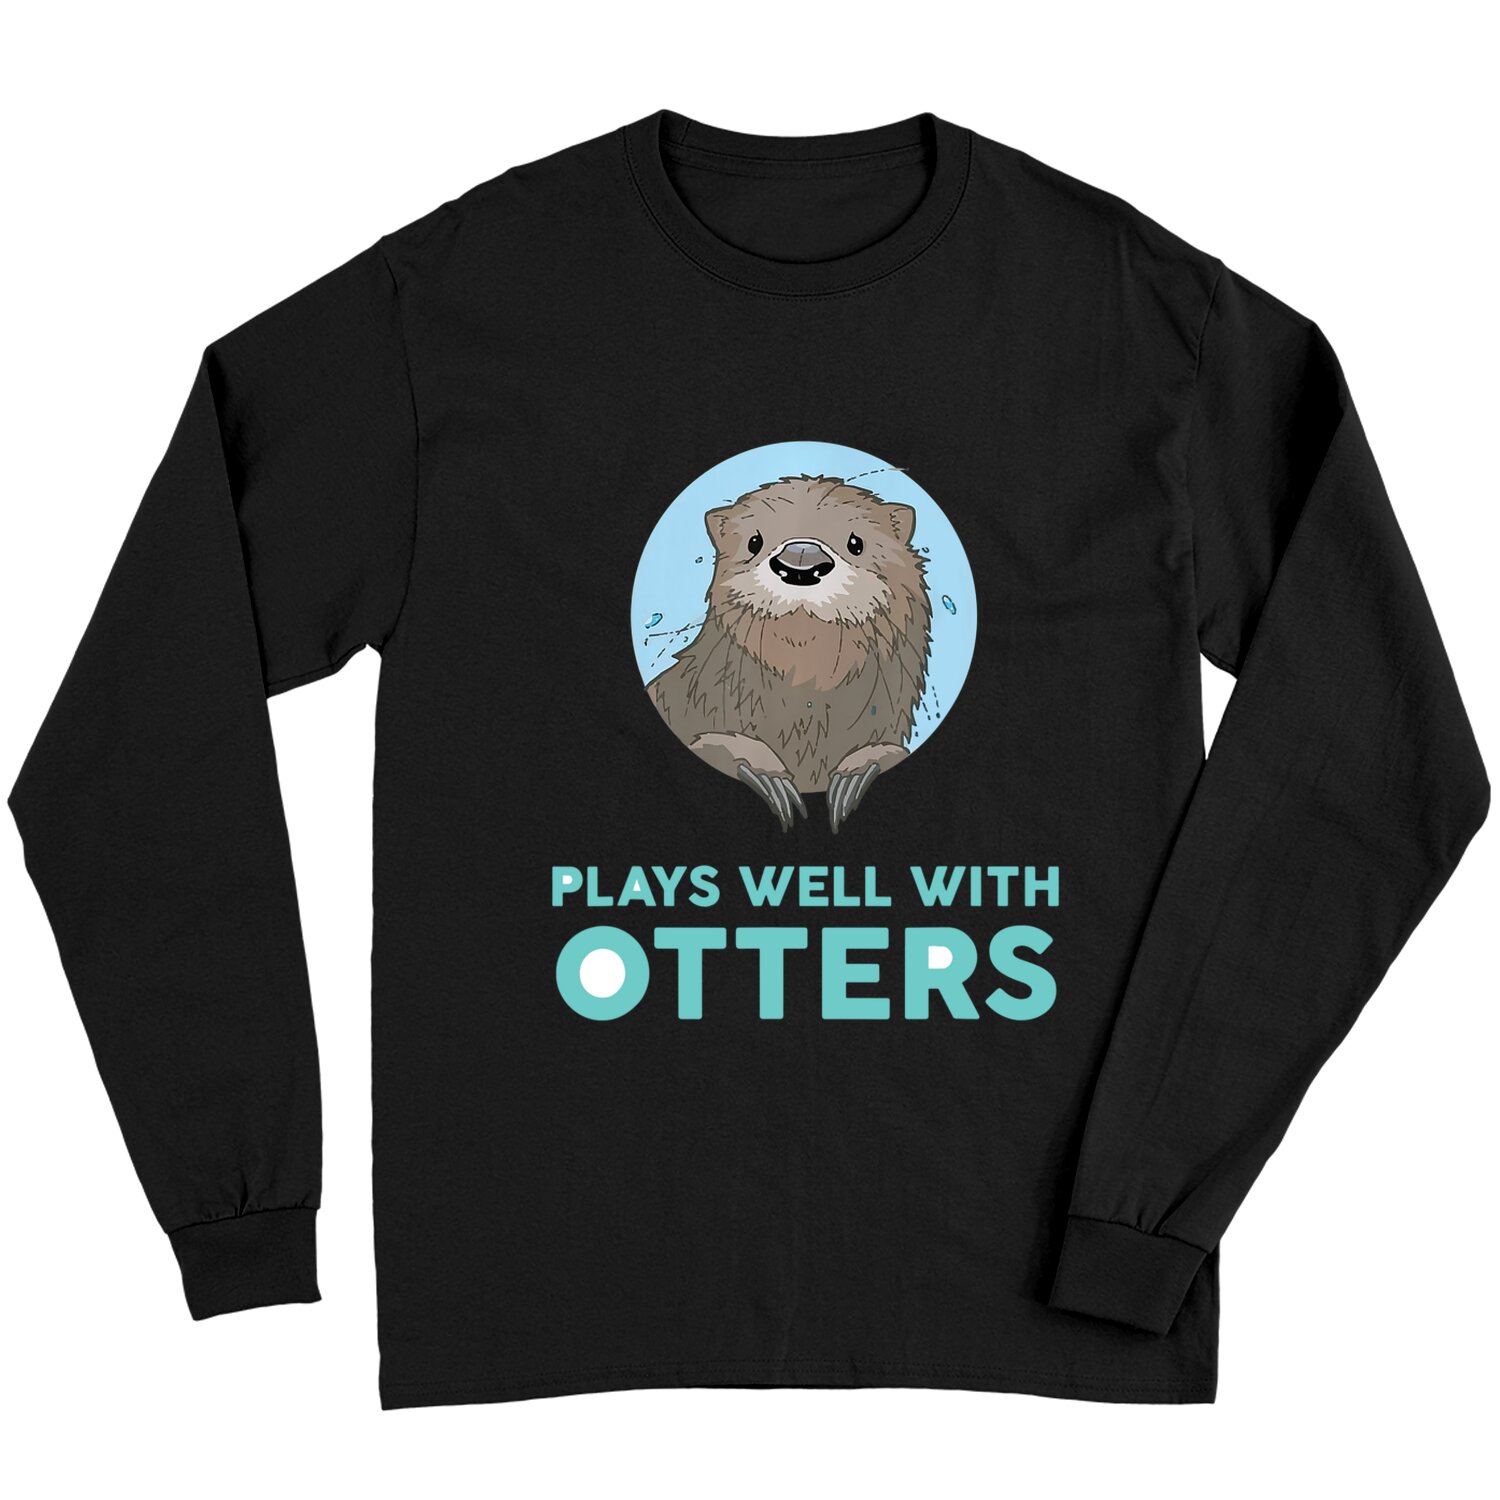 Otter Puns Long Sleeves Plays Well With Otters